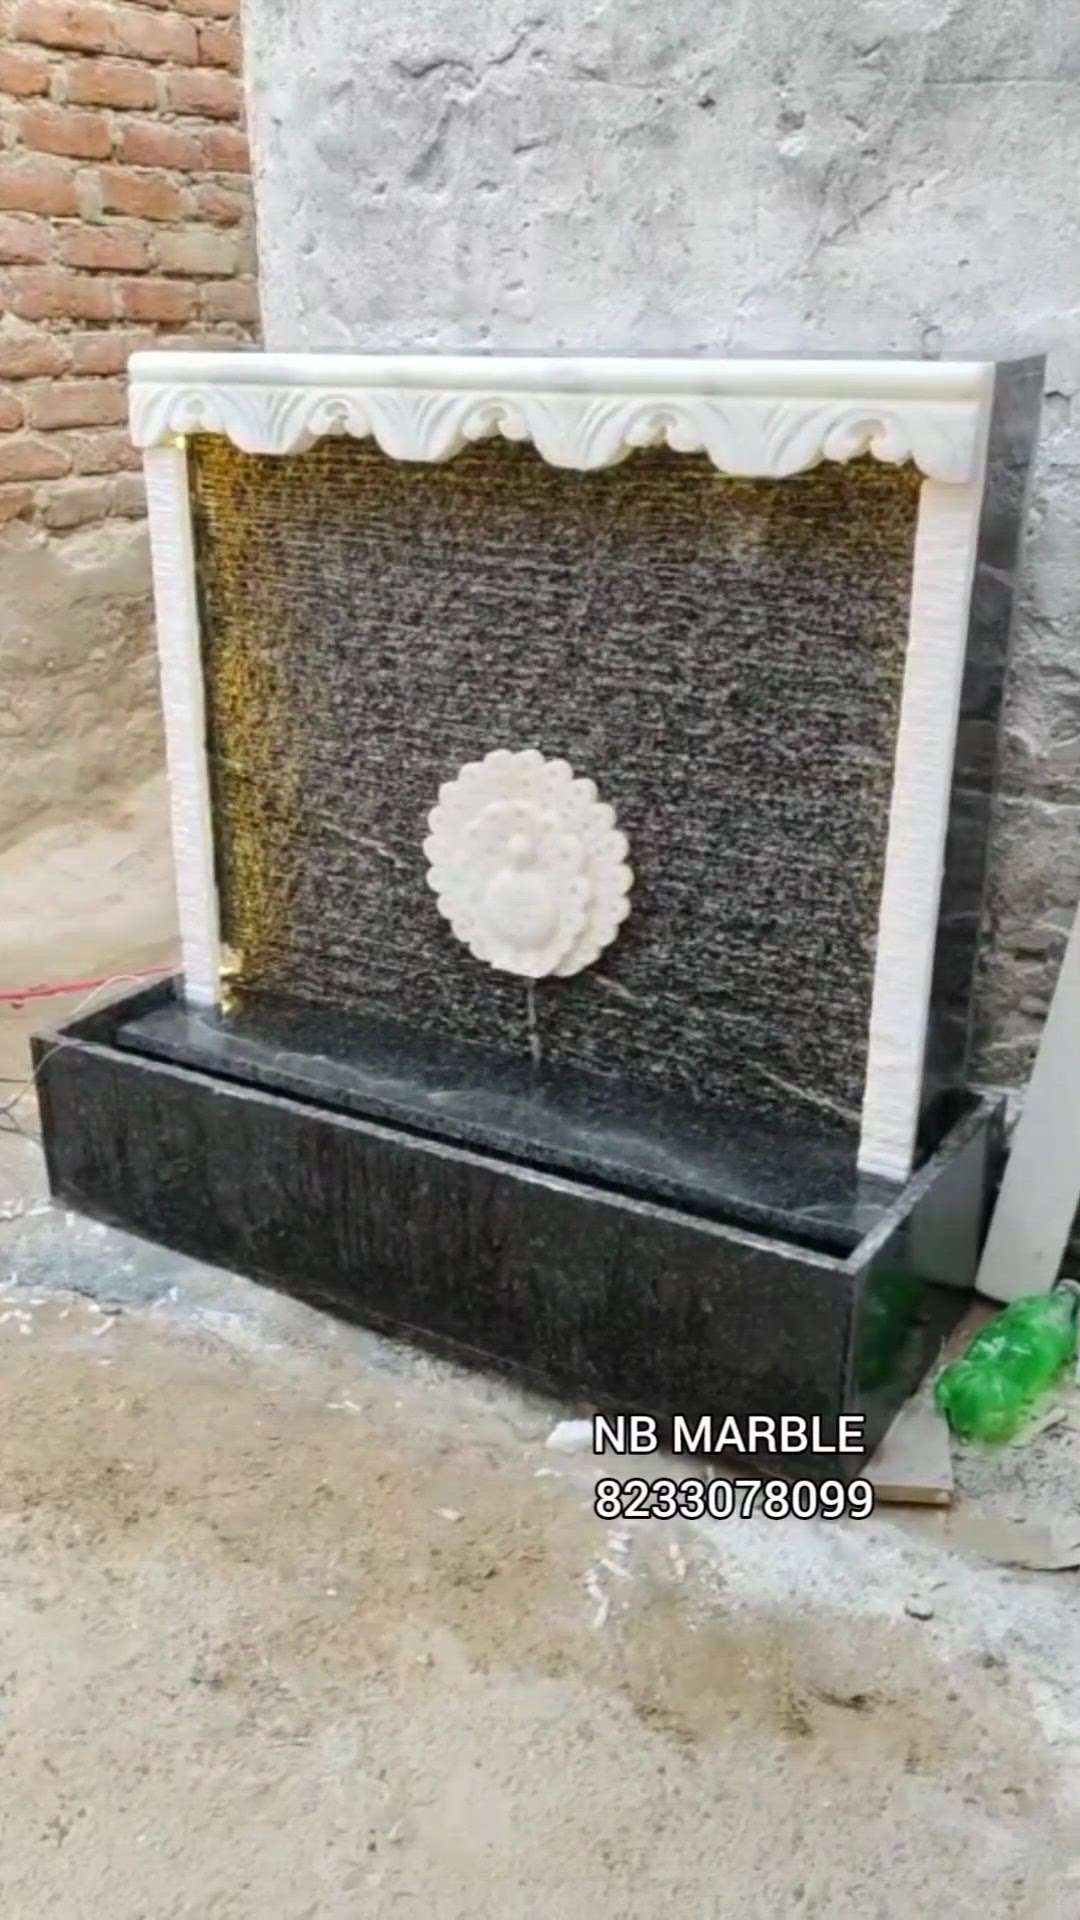 Marble Wall Fountain | Black Marble Wall Fountain | Makrana Kumari Marble Fountain | Garden Fountain | Water Fountain 

Decor your garden and living room with beautiful fountain 

We are manufacturer of marble and sandstone fountain 

We make any design according to your requirement and size 

Follow me @nbmarble

More information contact me 
8233078099
.
.
.
.
.
.
.
.
#fountain #nbmarble #gardenfountain #homedecor #waterfountain #waterfountains #gardendesigner #gardendesign #homedecor #waterfall #blackmarble #whitemarble #marblework #marbledesignwork